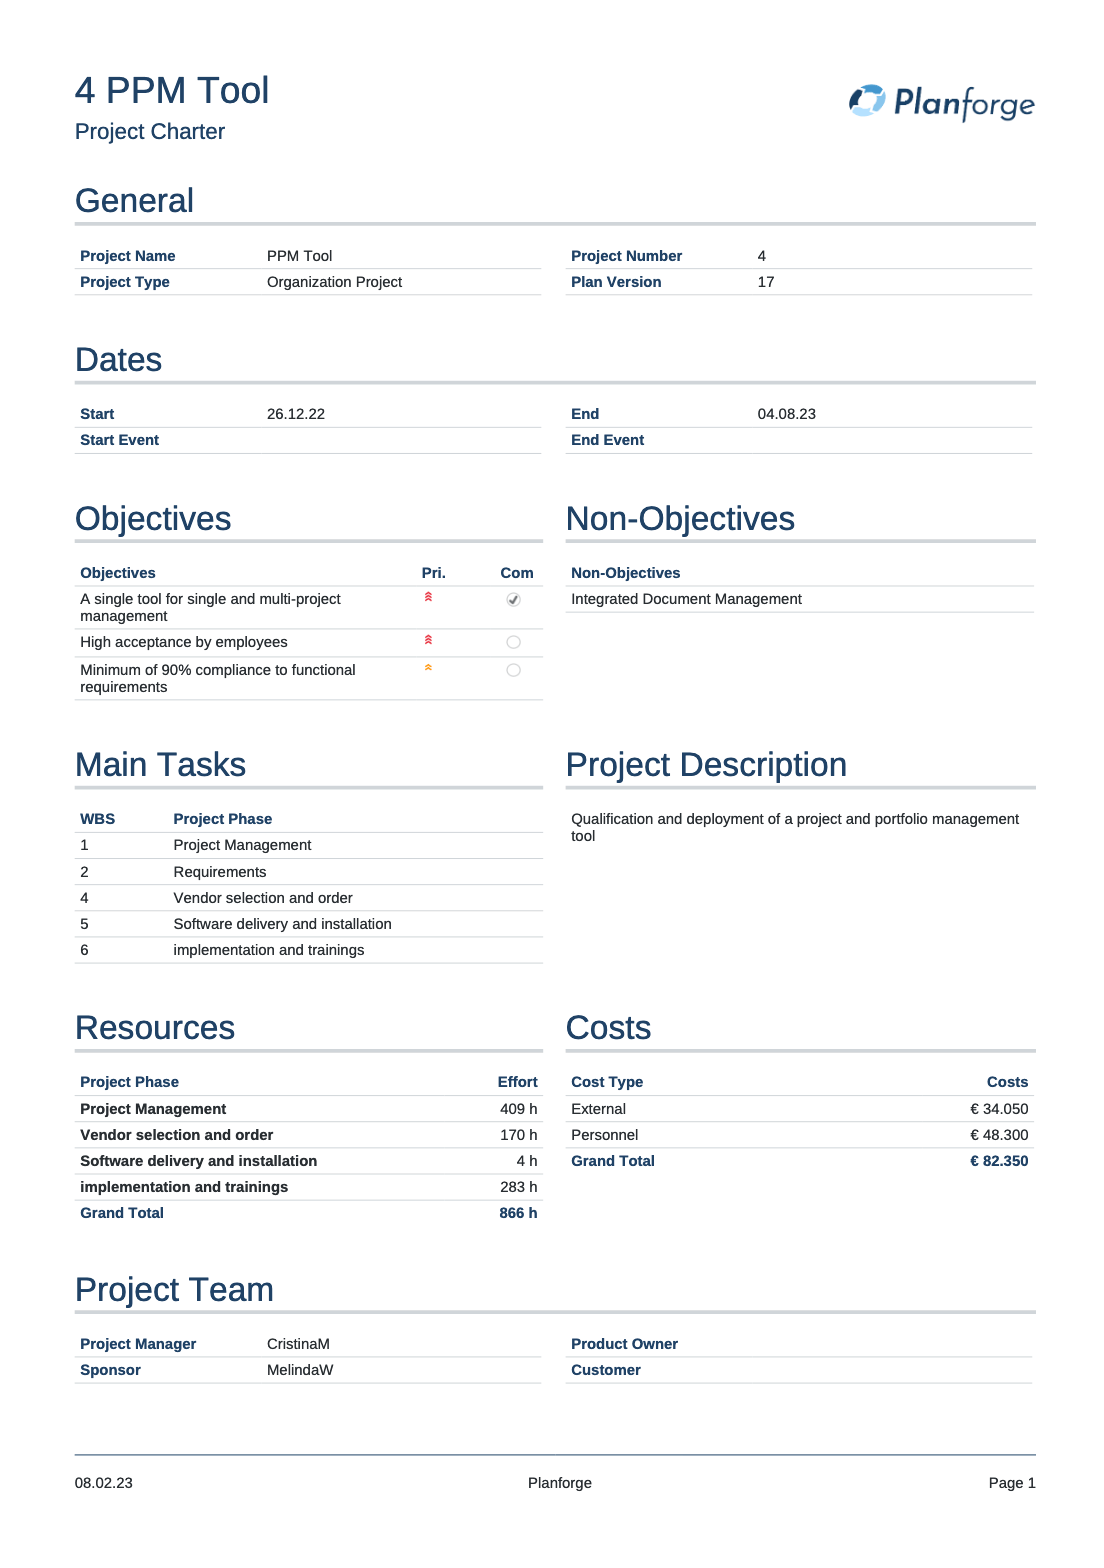 Planforge project charter